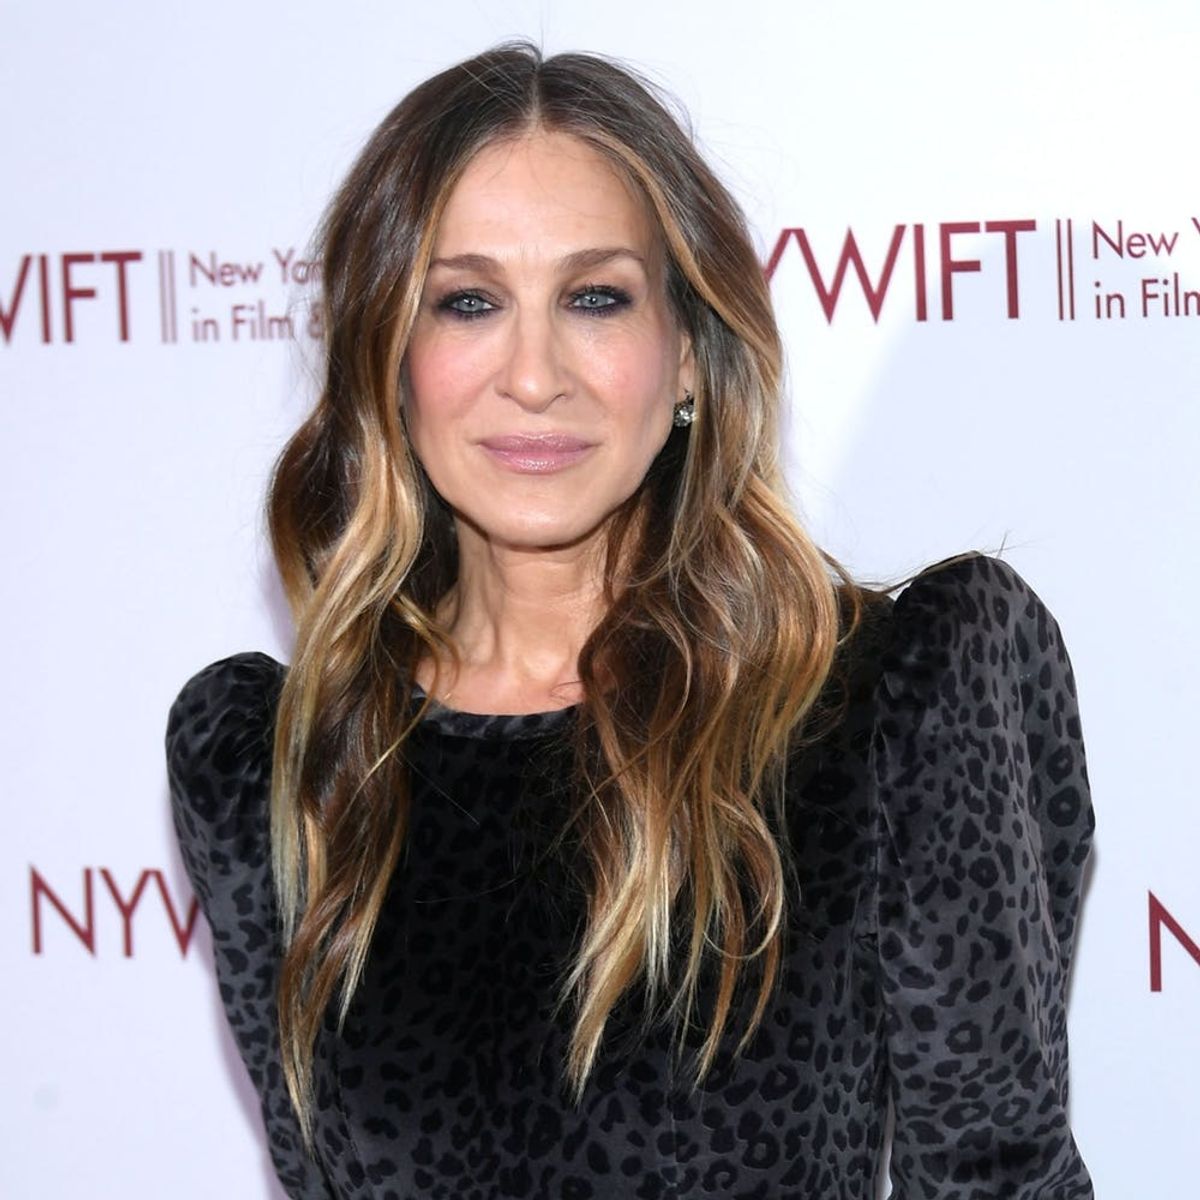 Sarah Jessica Parker Has an Honest Update About the Third ‘Sex and the City’ Movie